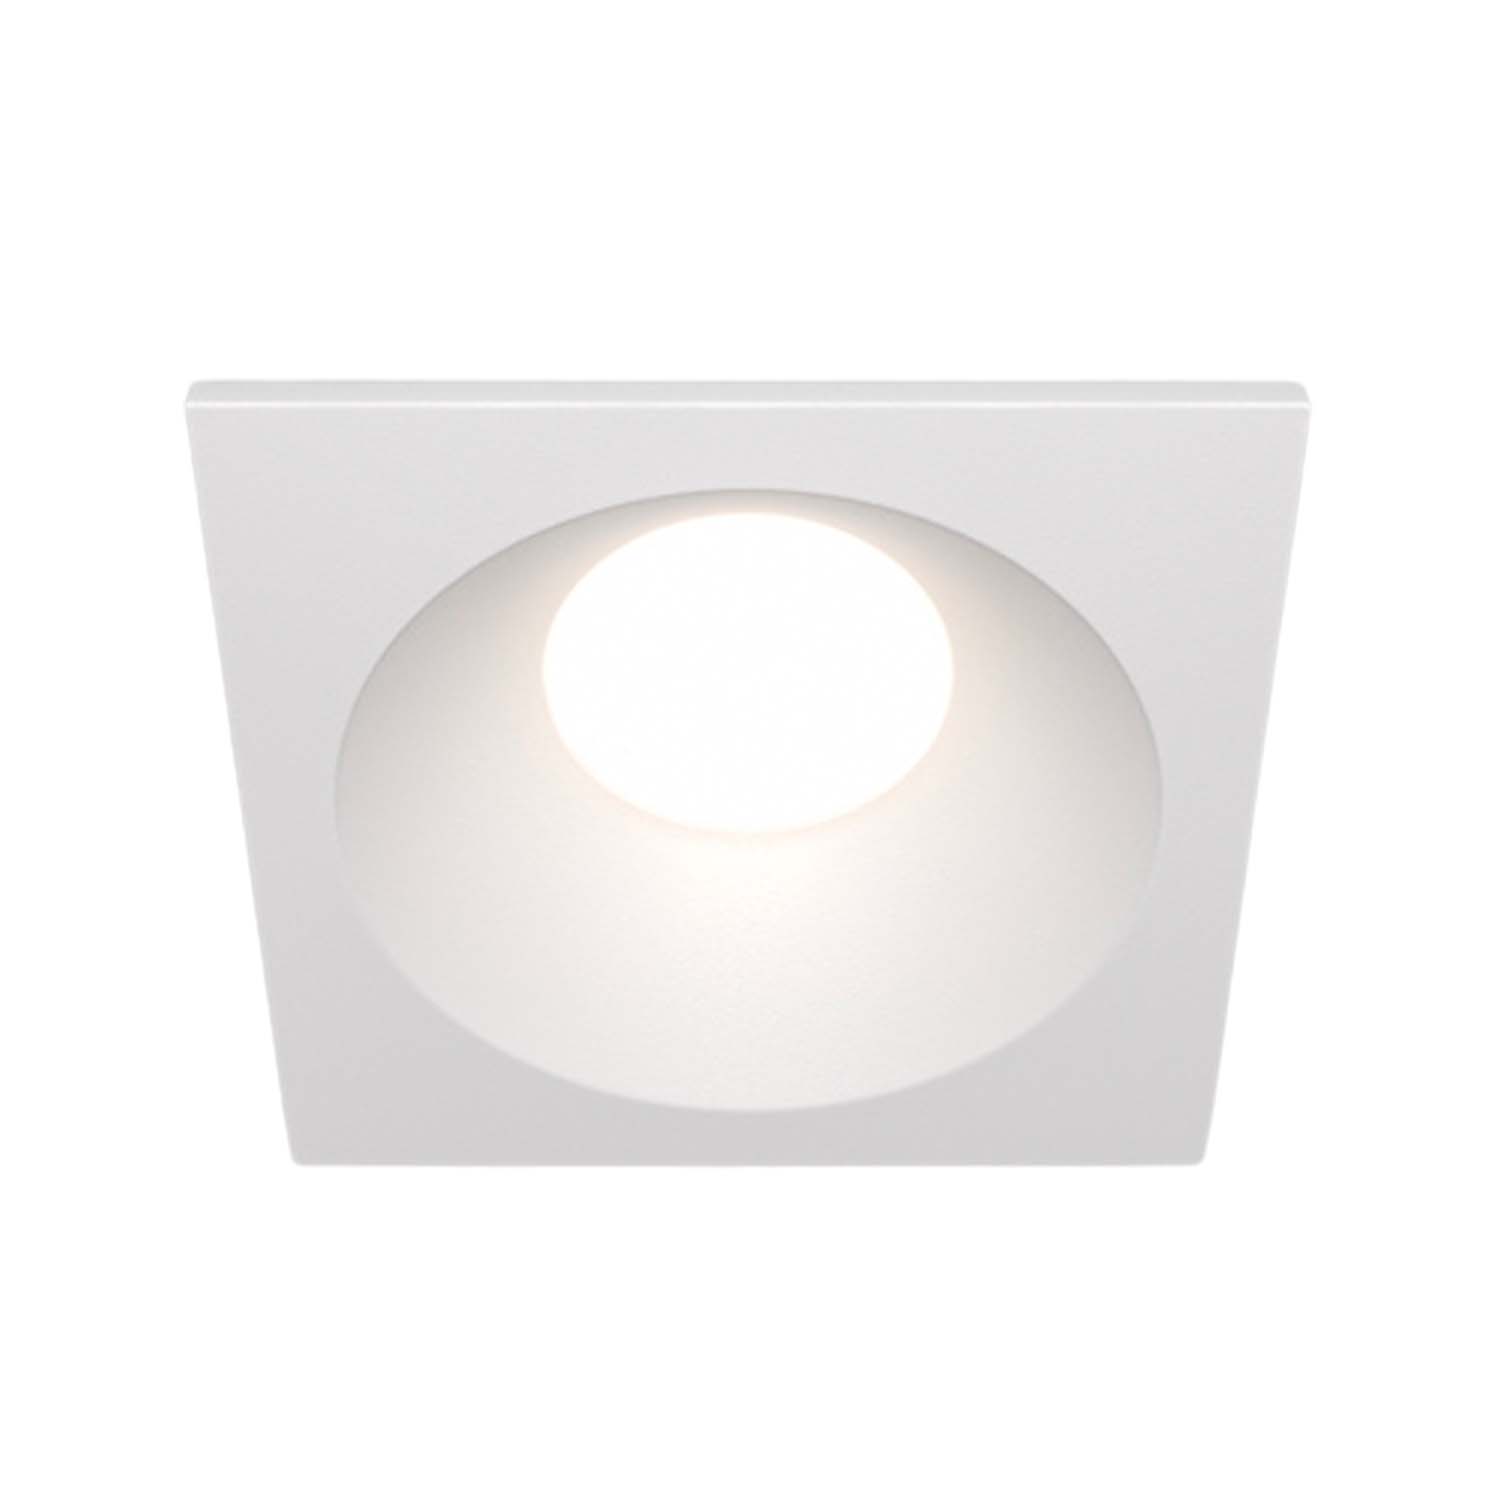 ZOOM - Waterproof outdoor square recessed spotlight, black or white, 85mm